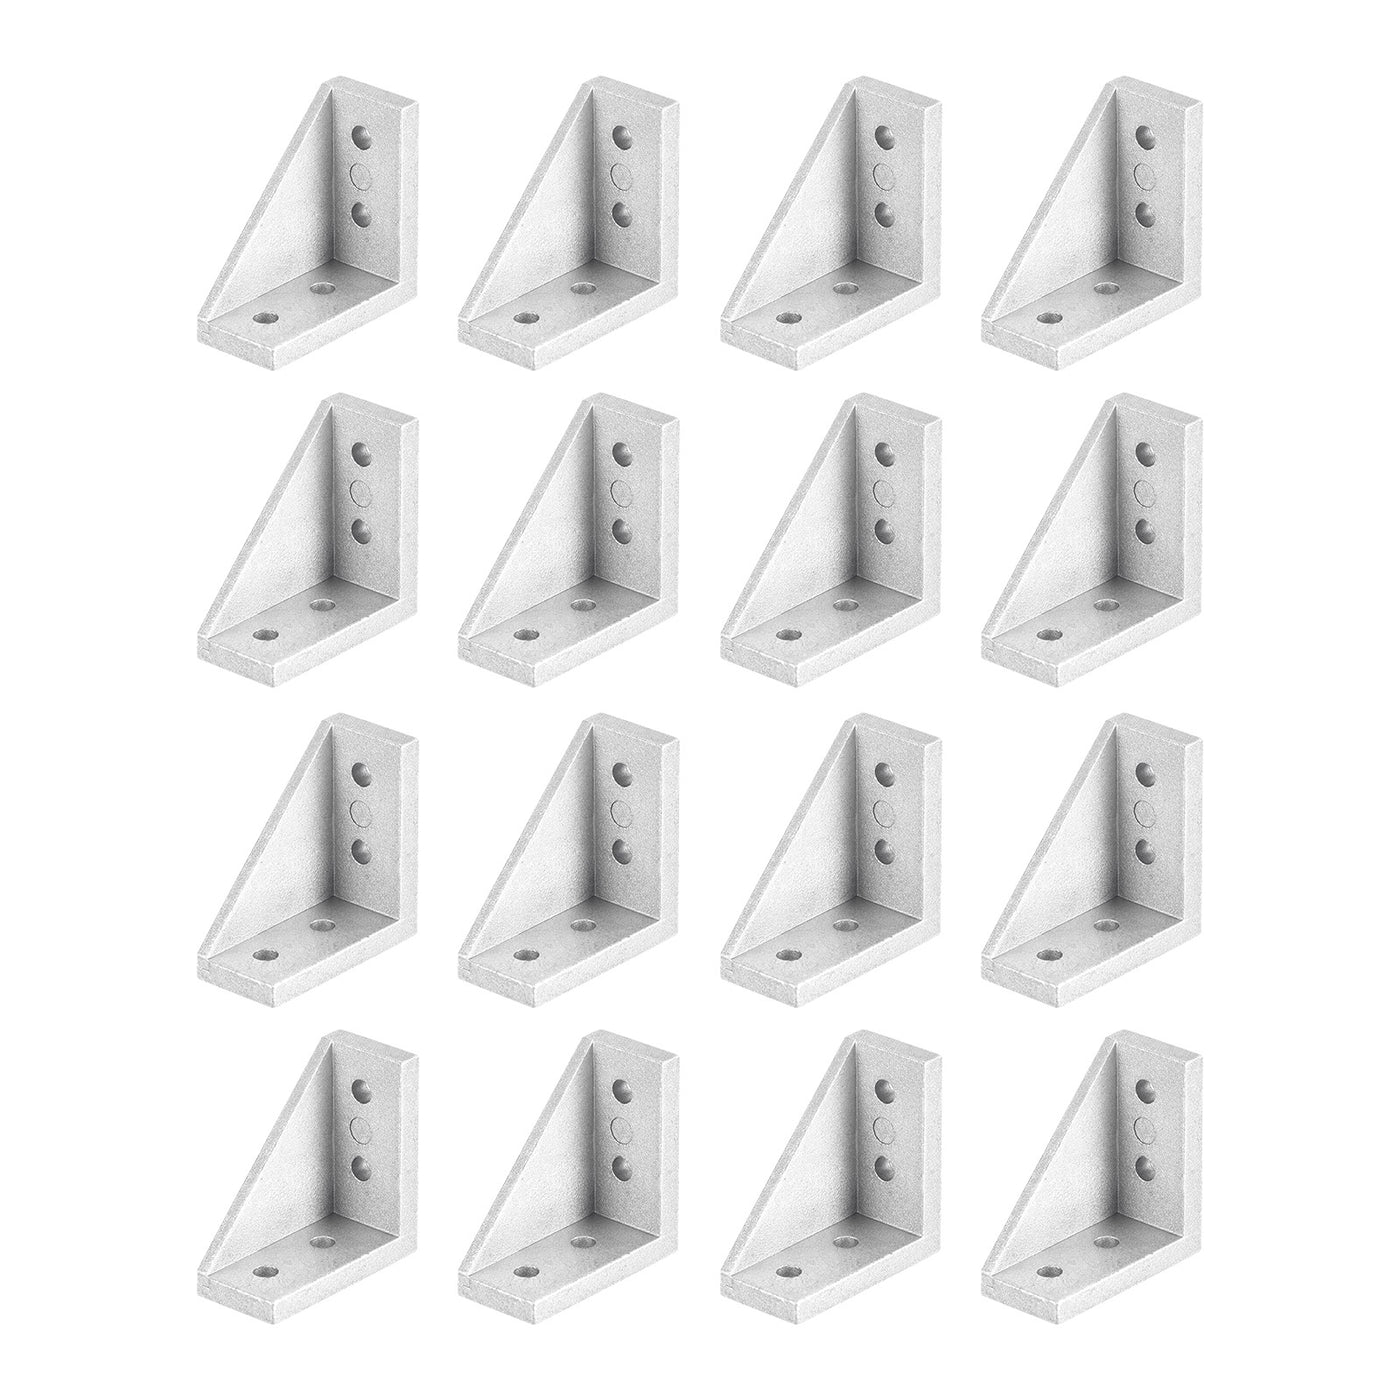 uxcell Uxcell 16Pcs Inside Corner Bracket Gusset, 38x38x18mm 2040 Angle Connectors for 2020/2040 Series Aluminum Extrusion Profile Silver